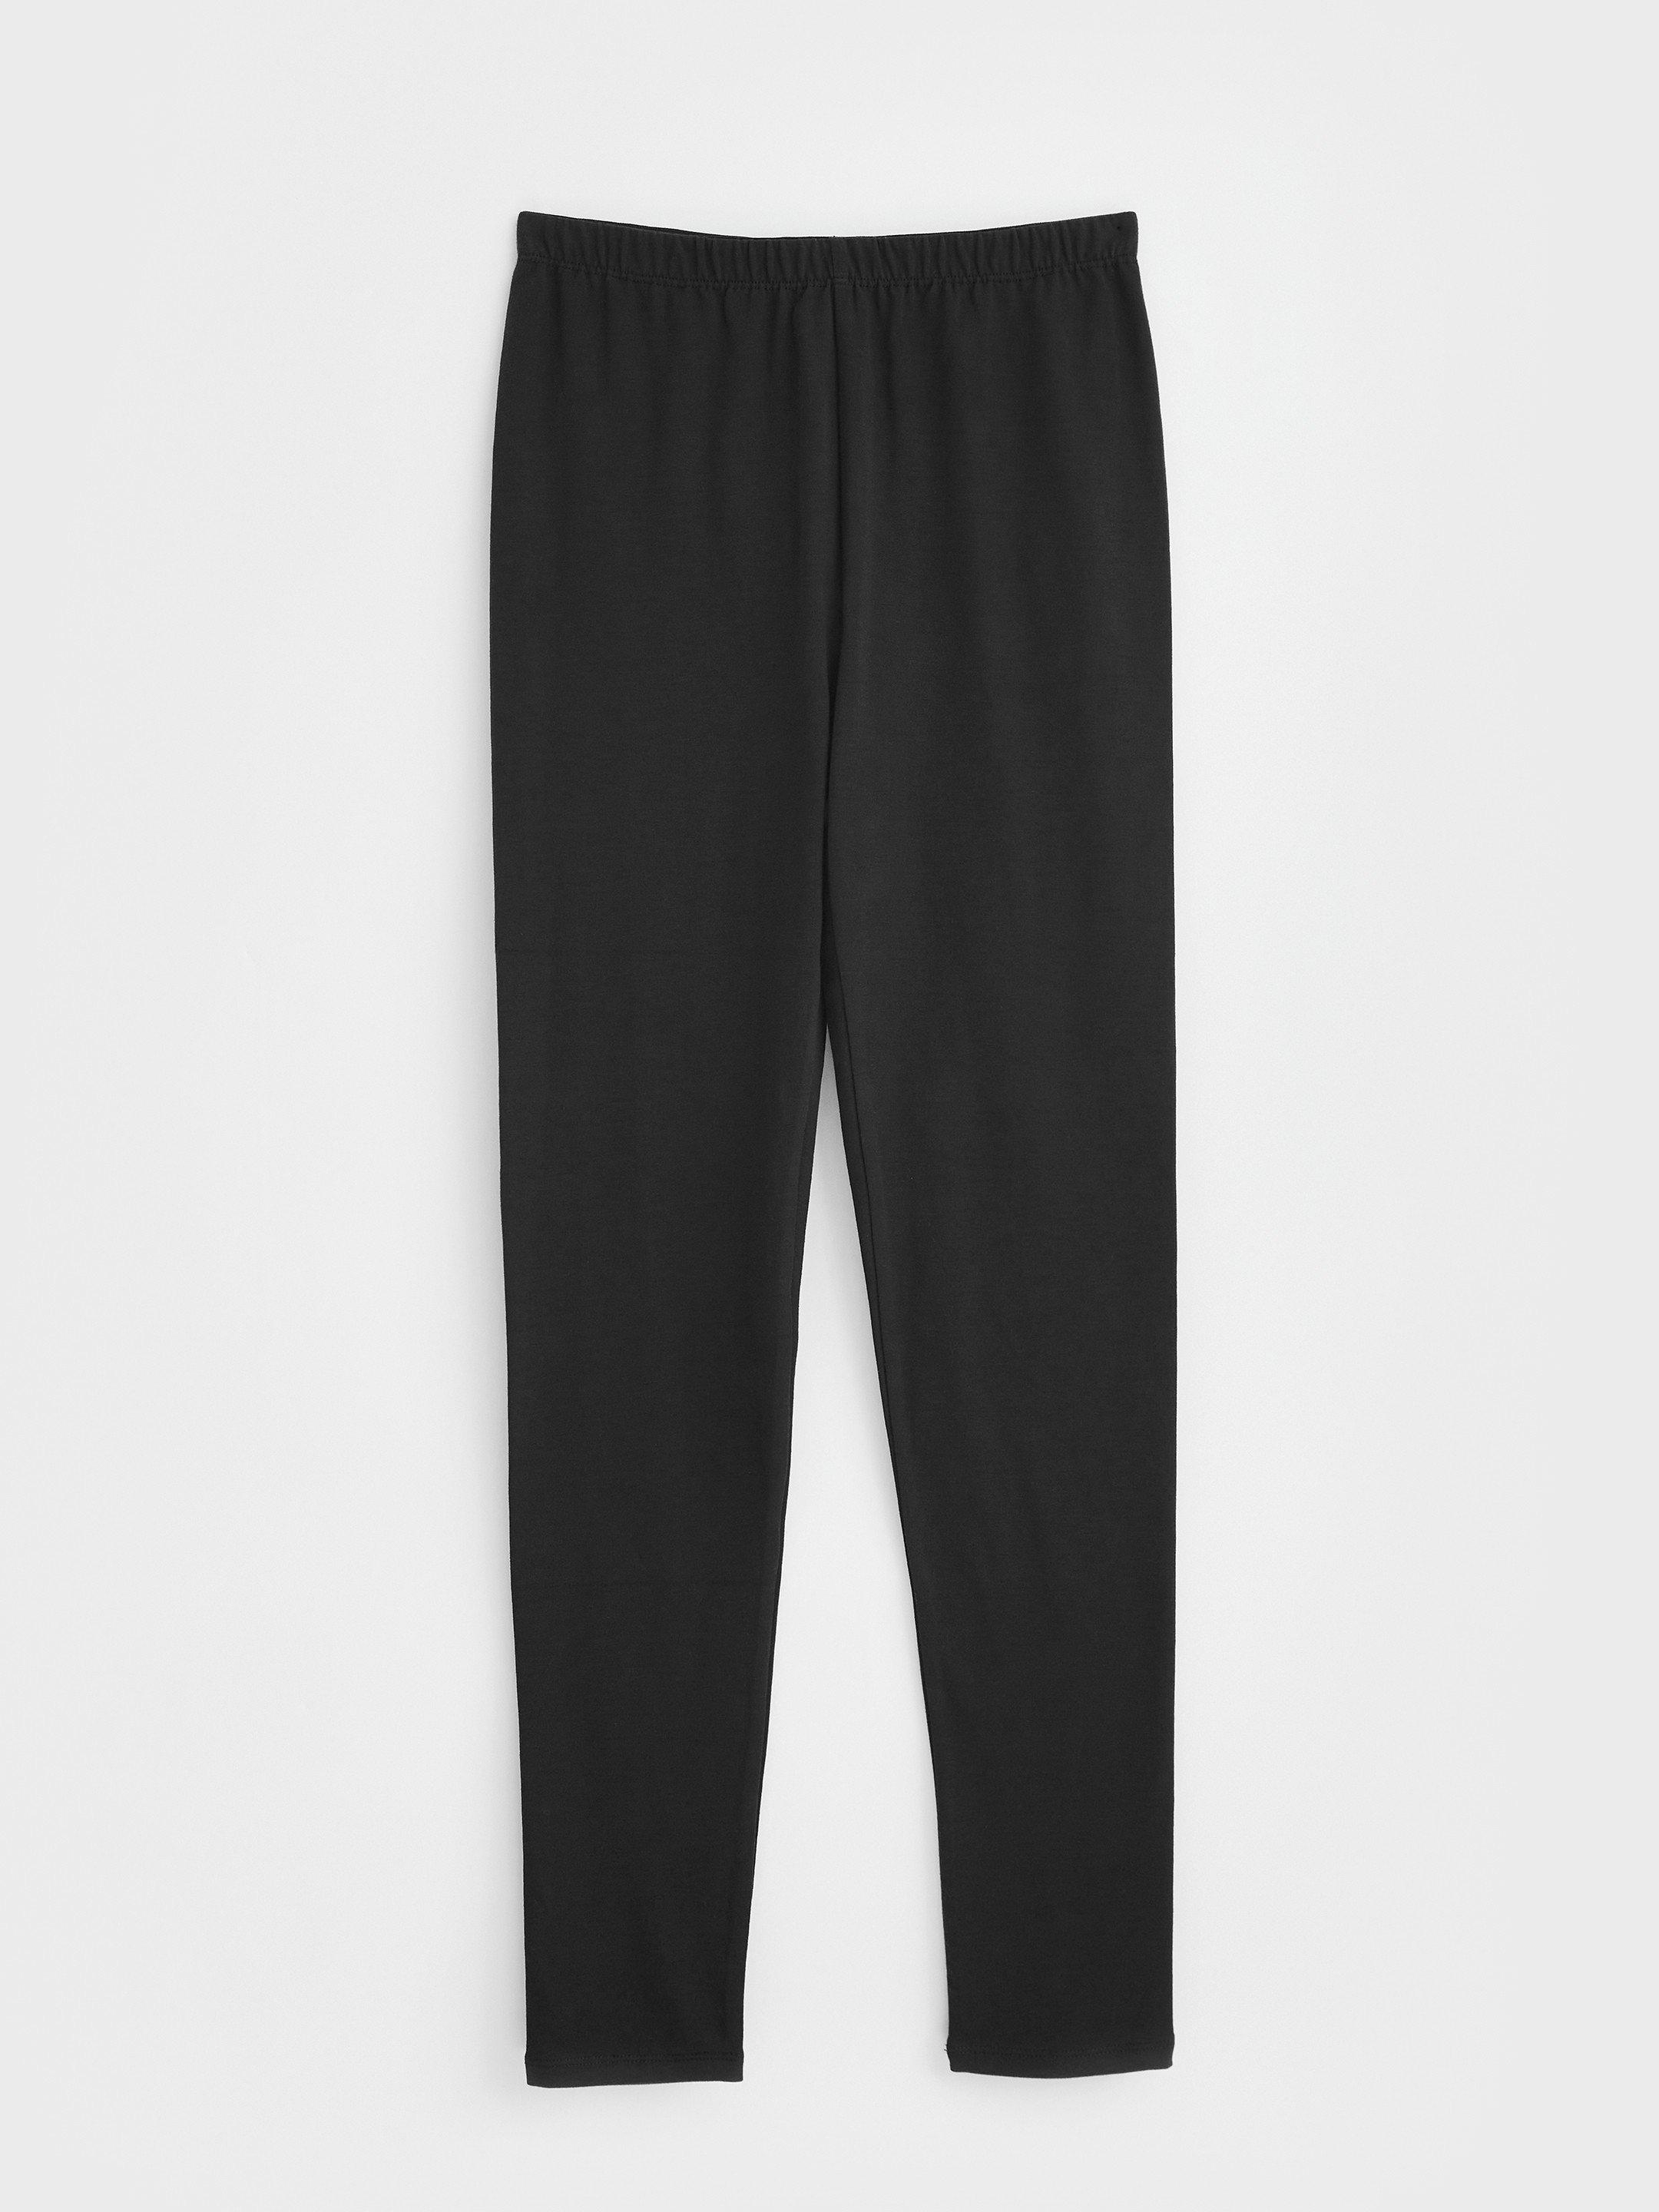 Maddie Leggings in PURE BLK - FLAT FRONT